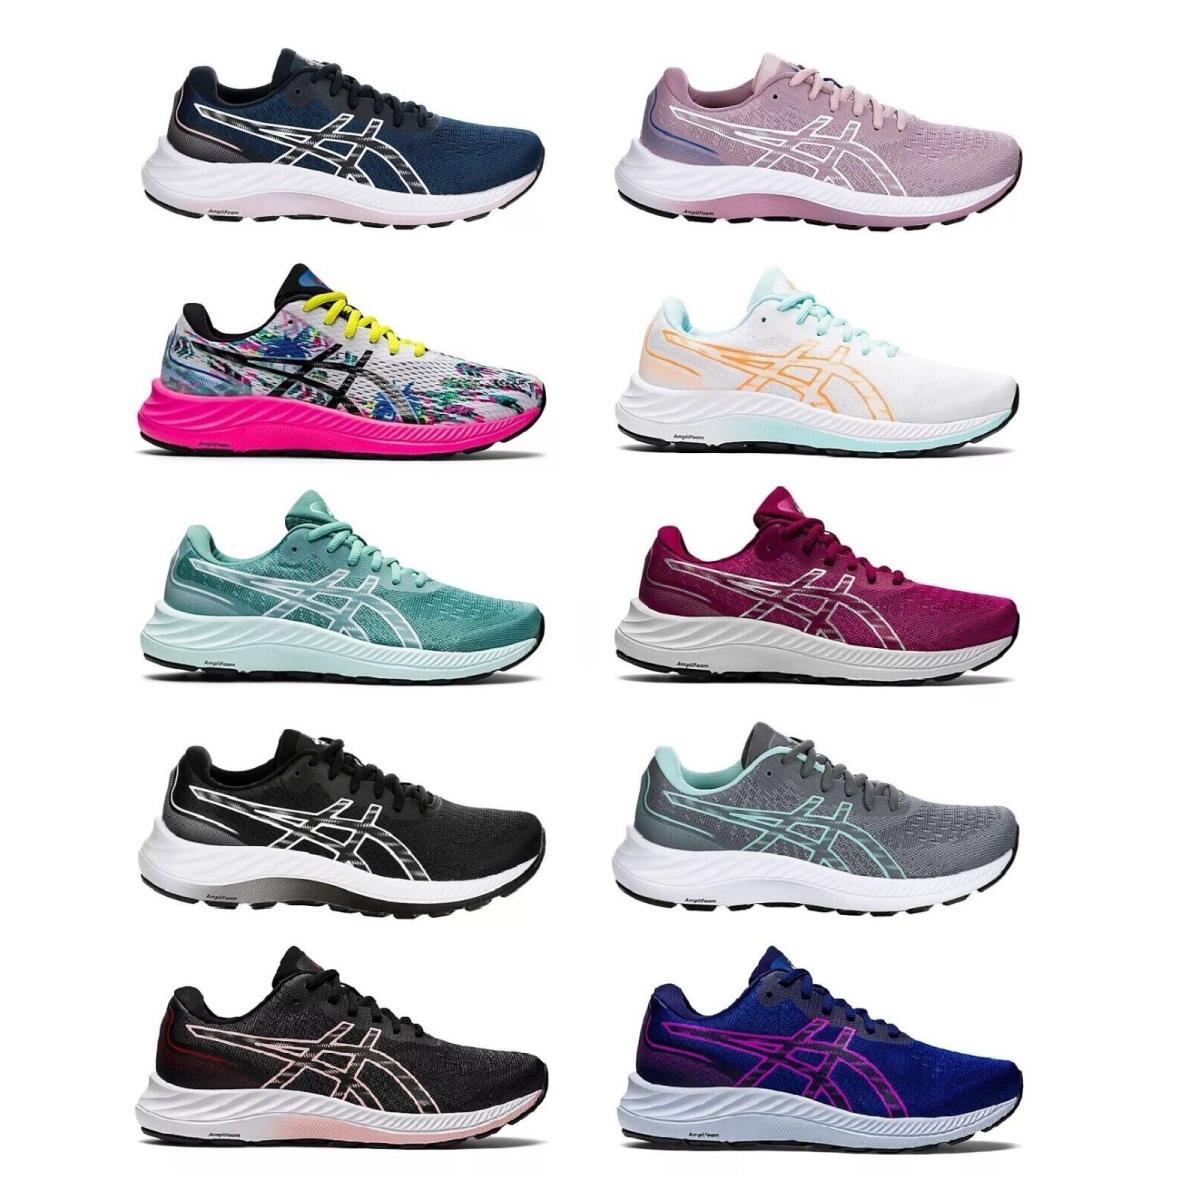 Asics Gel-excite 9 Women`s Athletic Running Gym Low Top Shoes Sneakers 6-11